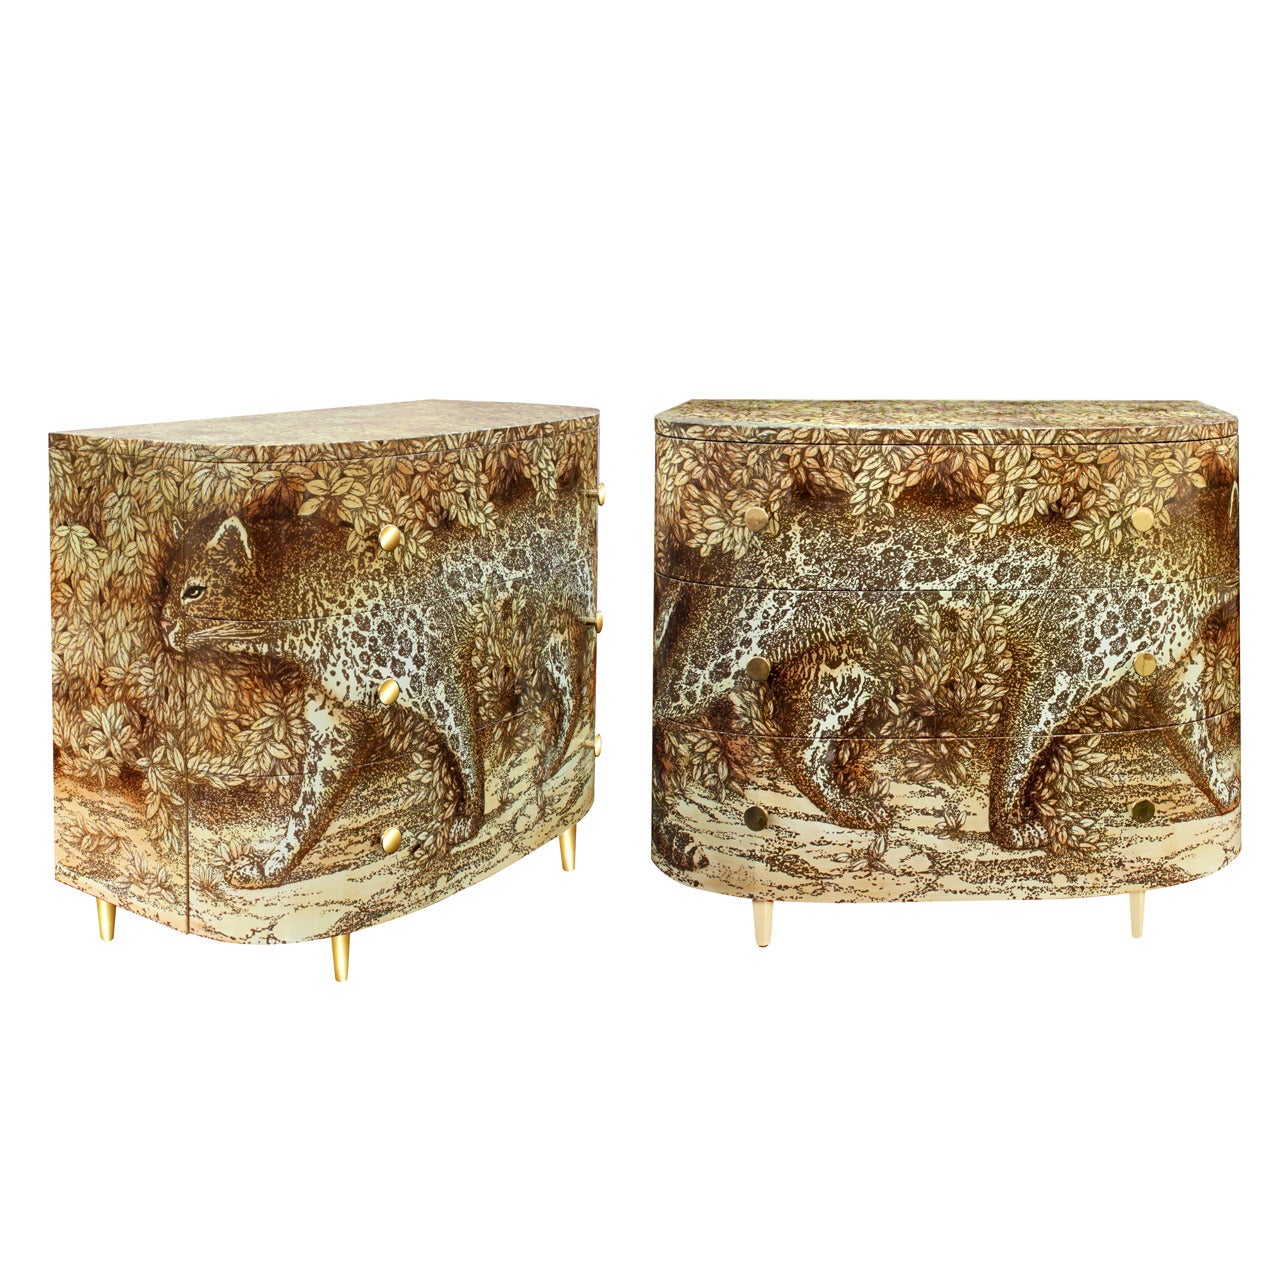 Pair of "Leopardo" Chests by Barnaba Fornasetti